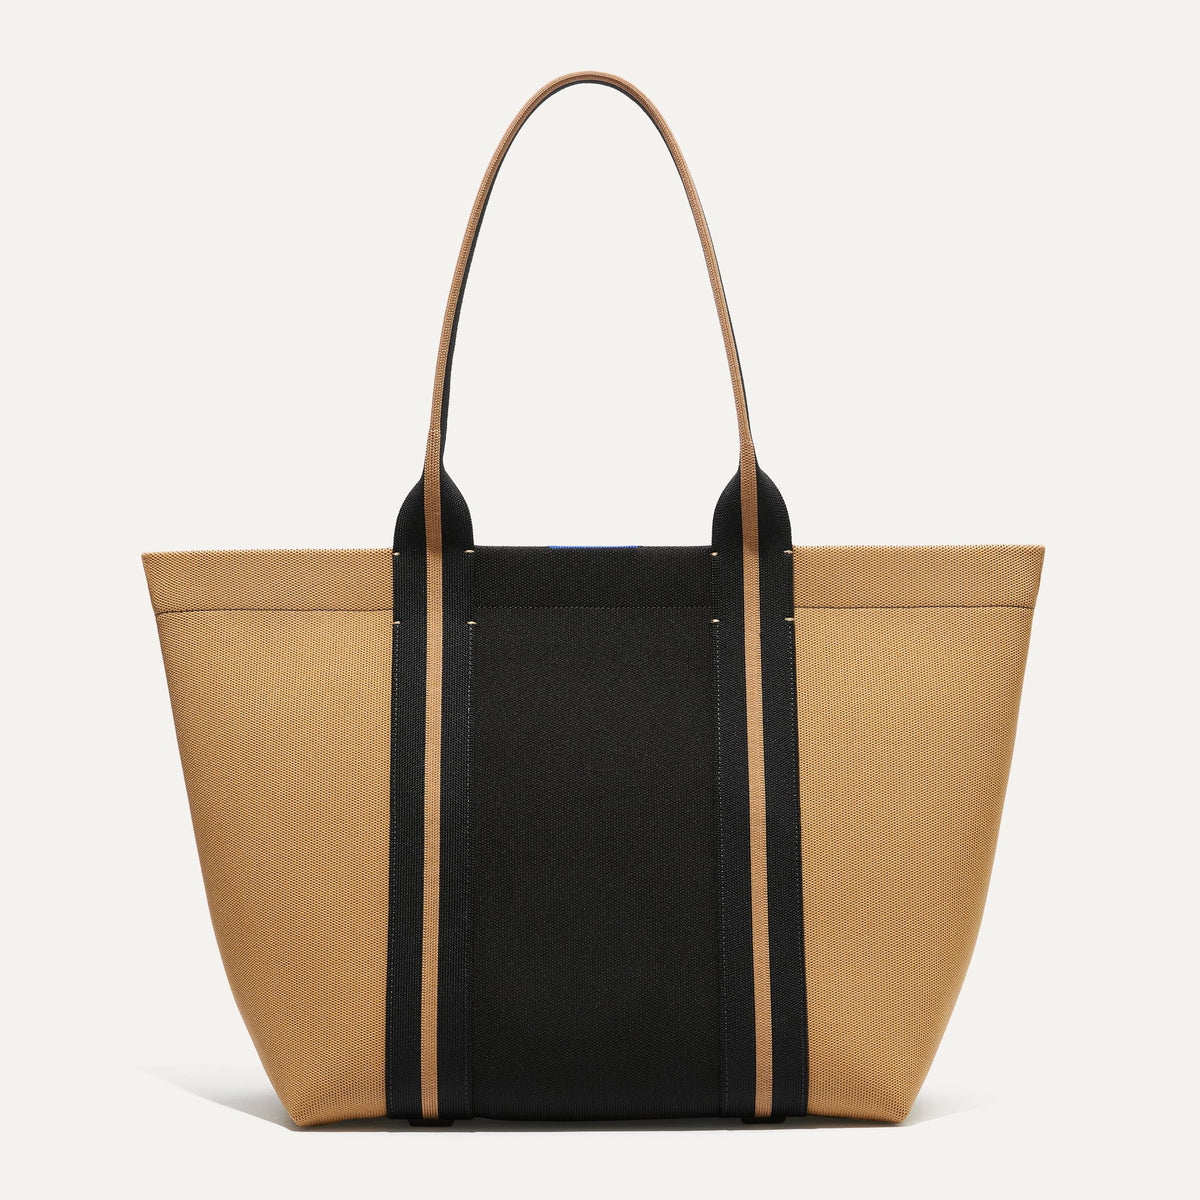 The Essential Tote in Camel and Black | Bags & Accessories | Rothy's